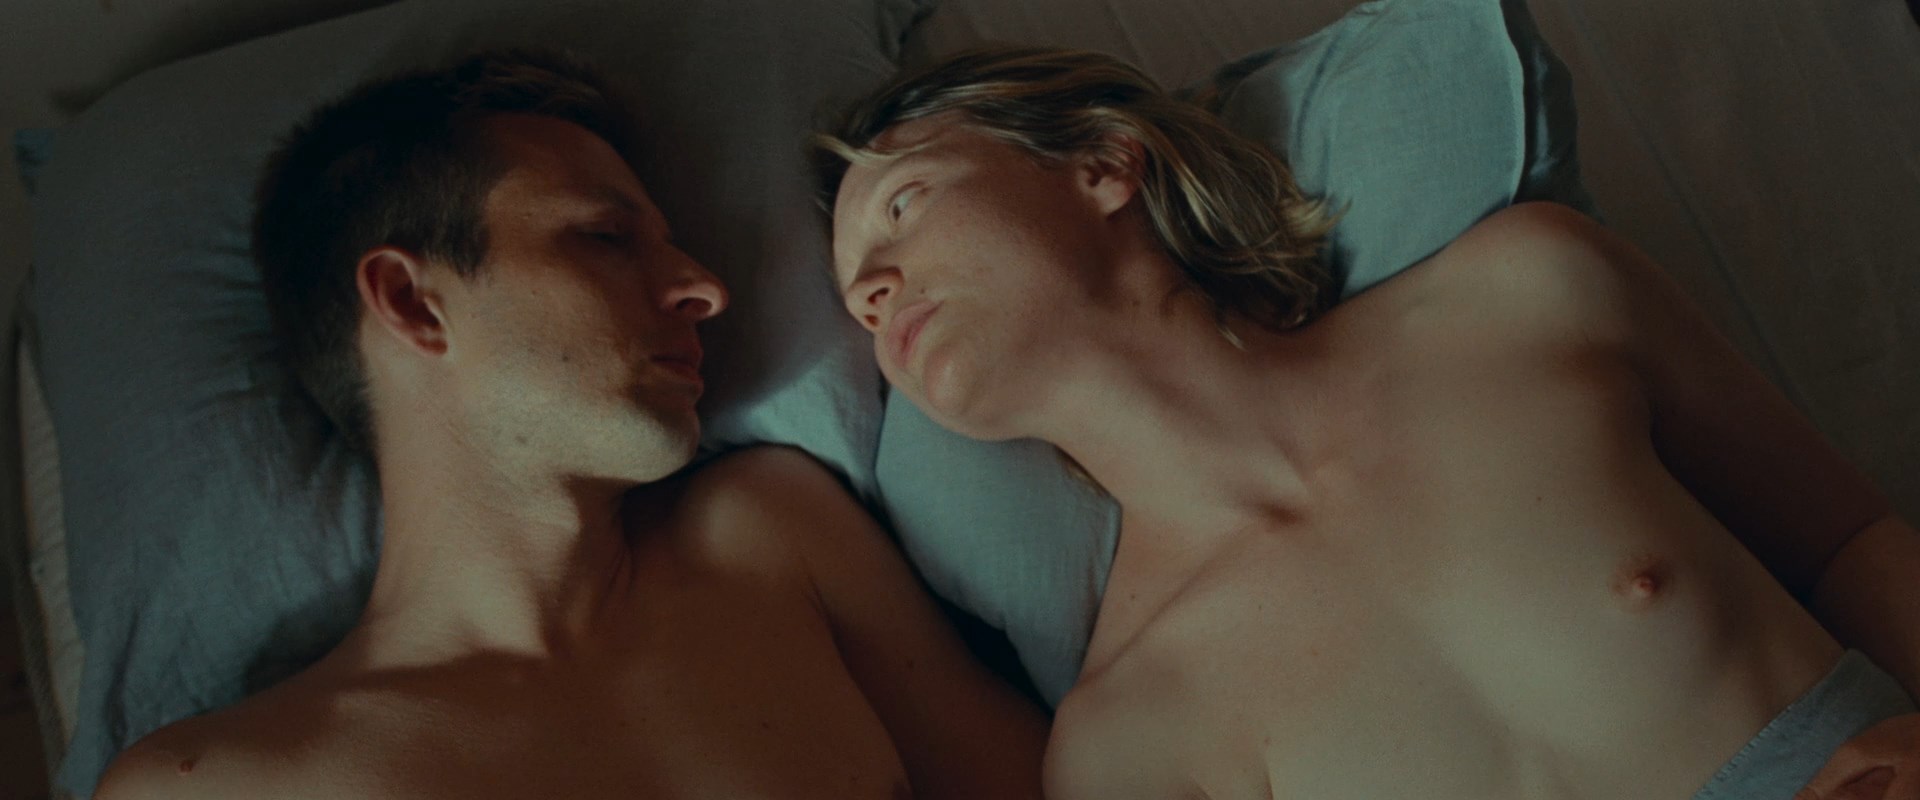 Mia Wasikowska is laying topless next to some guy.